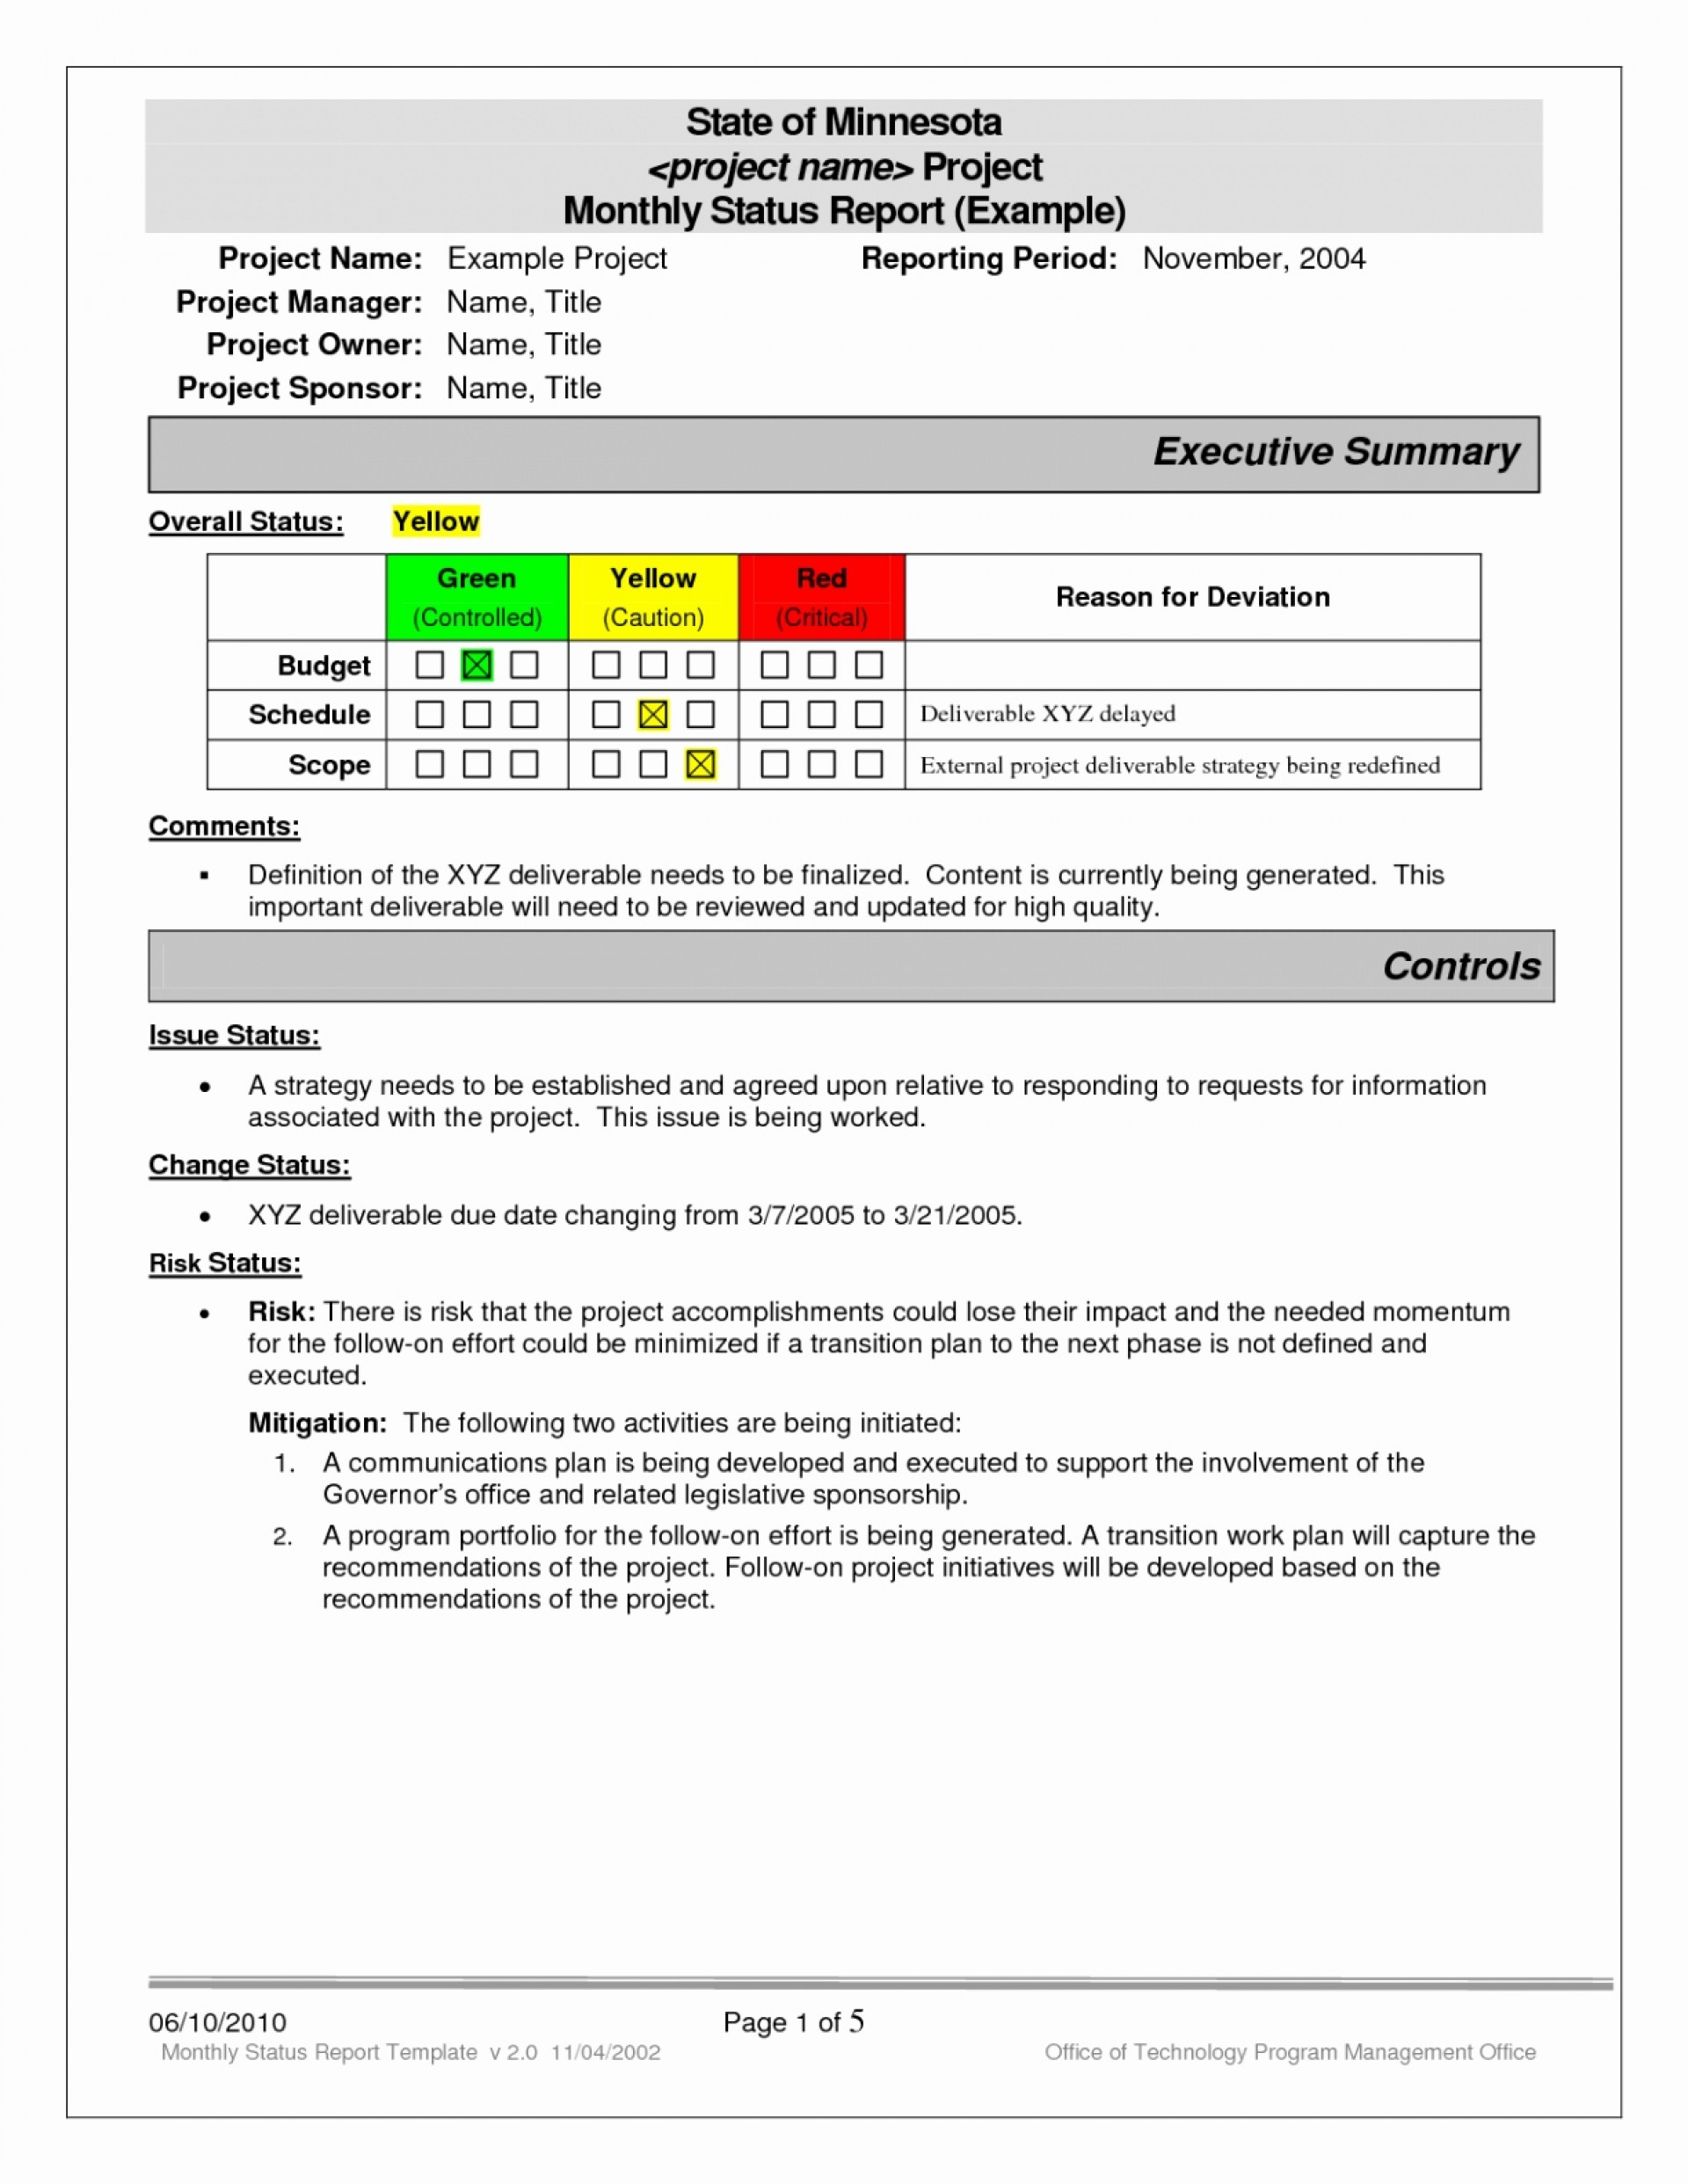 023 Excel Project Status Report Weekly Template 4Vy49Mzf Inside Software Testing Weekly Status Report Template